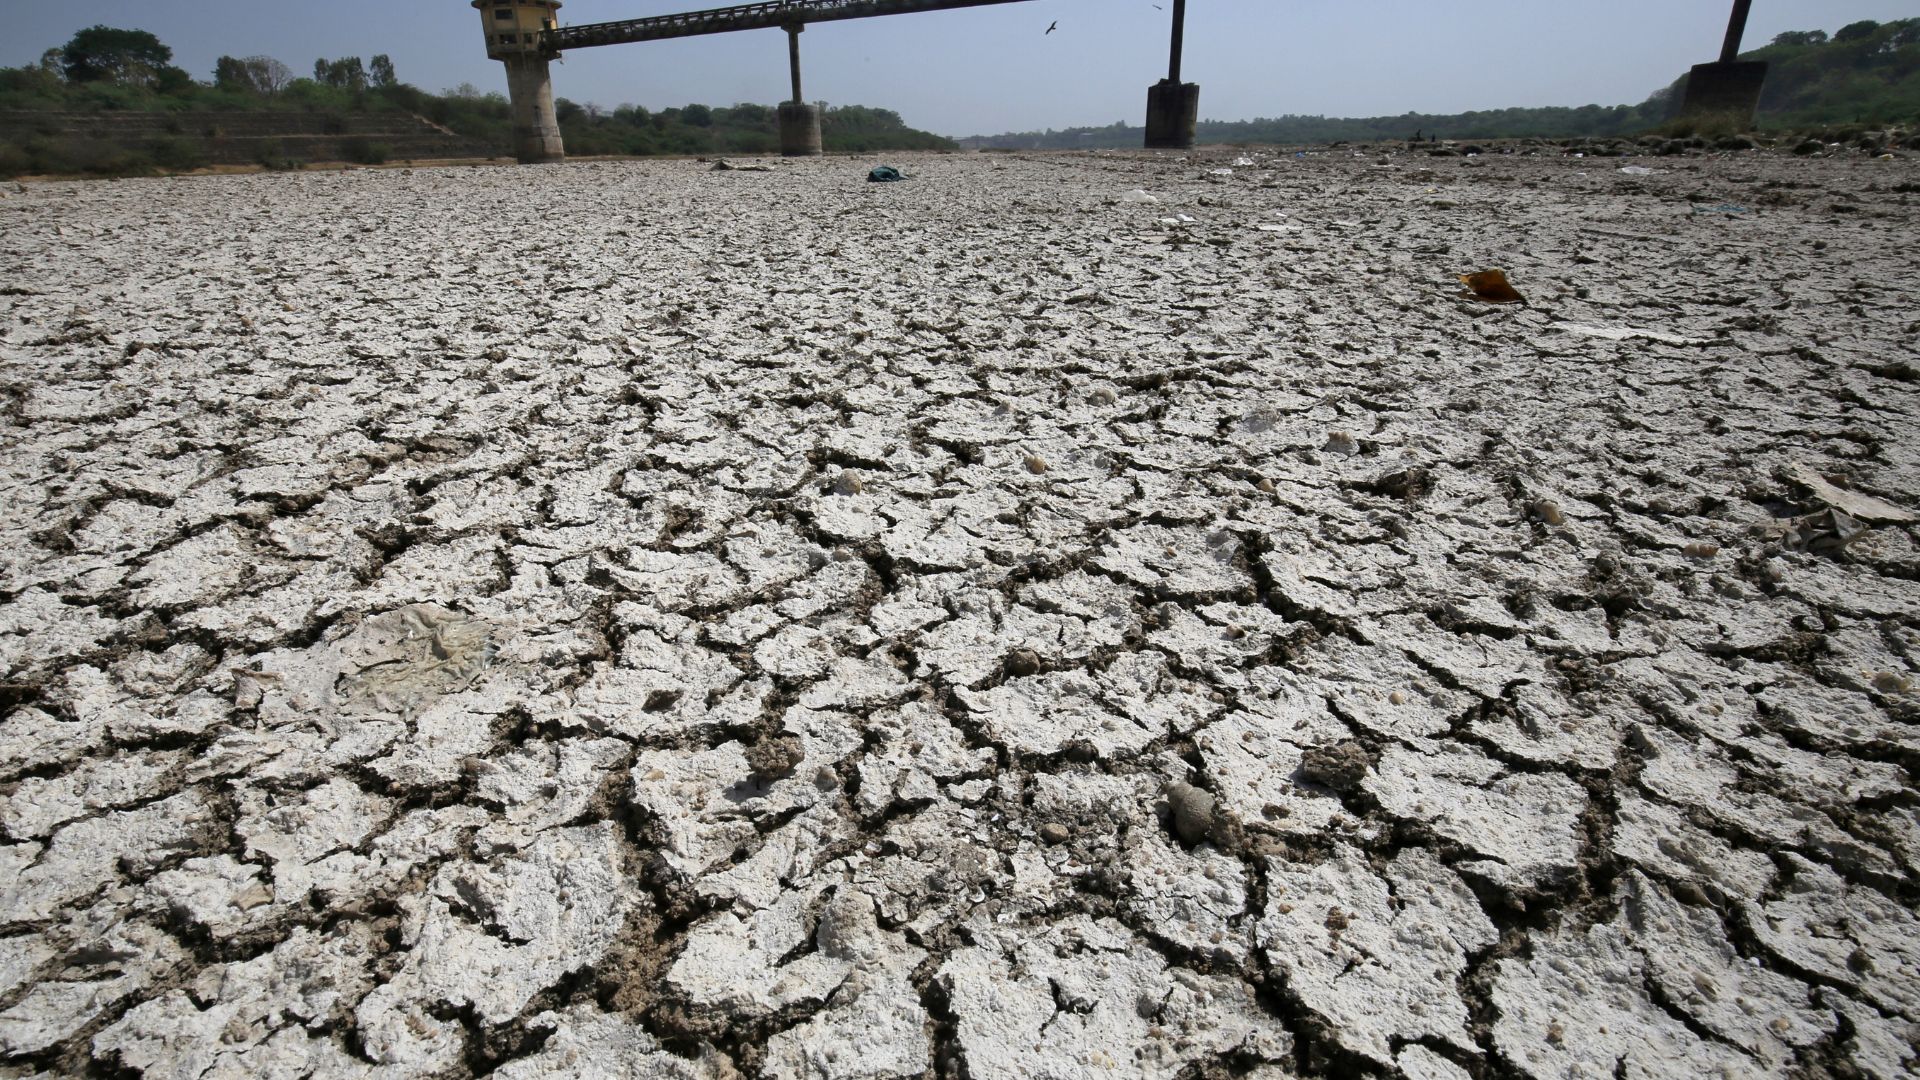 A water pump shed in the dried-up portion of the Sabarmati river near Ahmedabad, India. /Amit Dave/Reuters